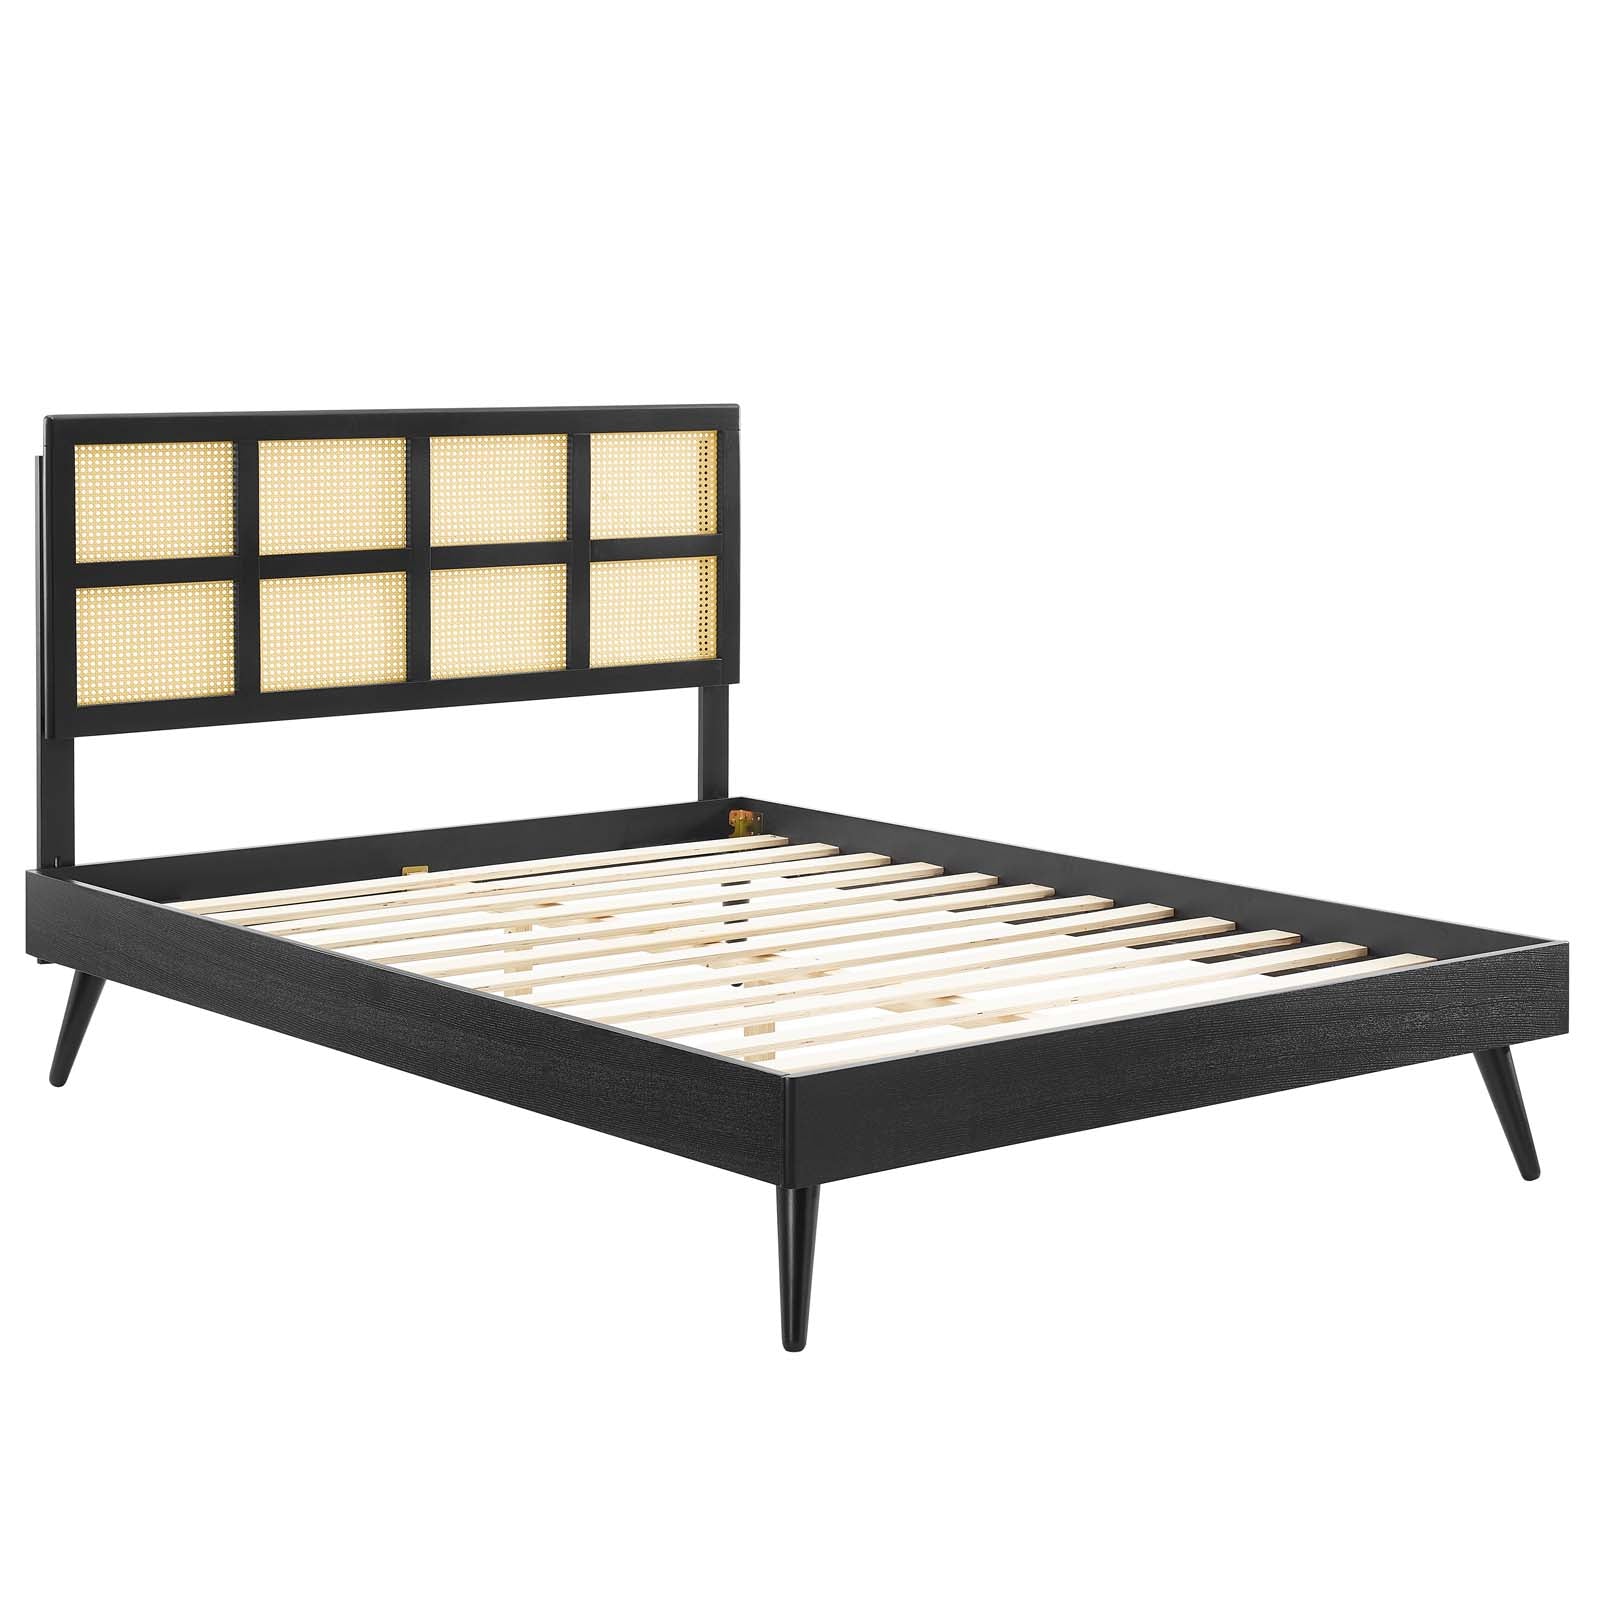 Sidney Cane and Wood Queen Platform Bed With Splayed Legs